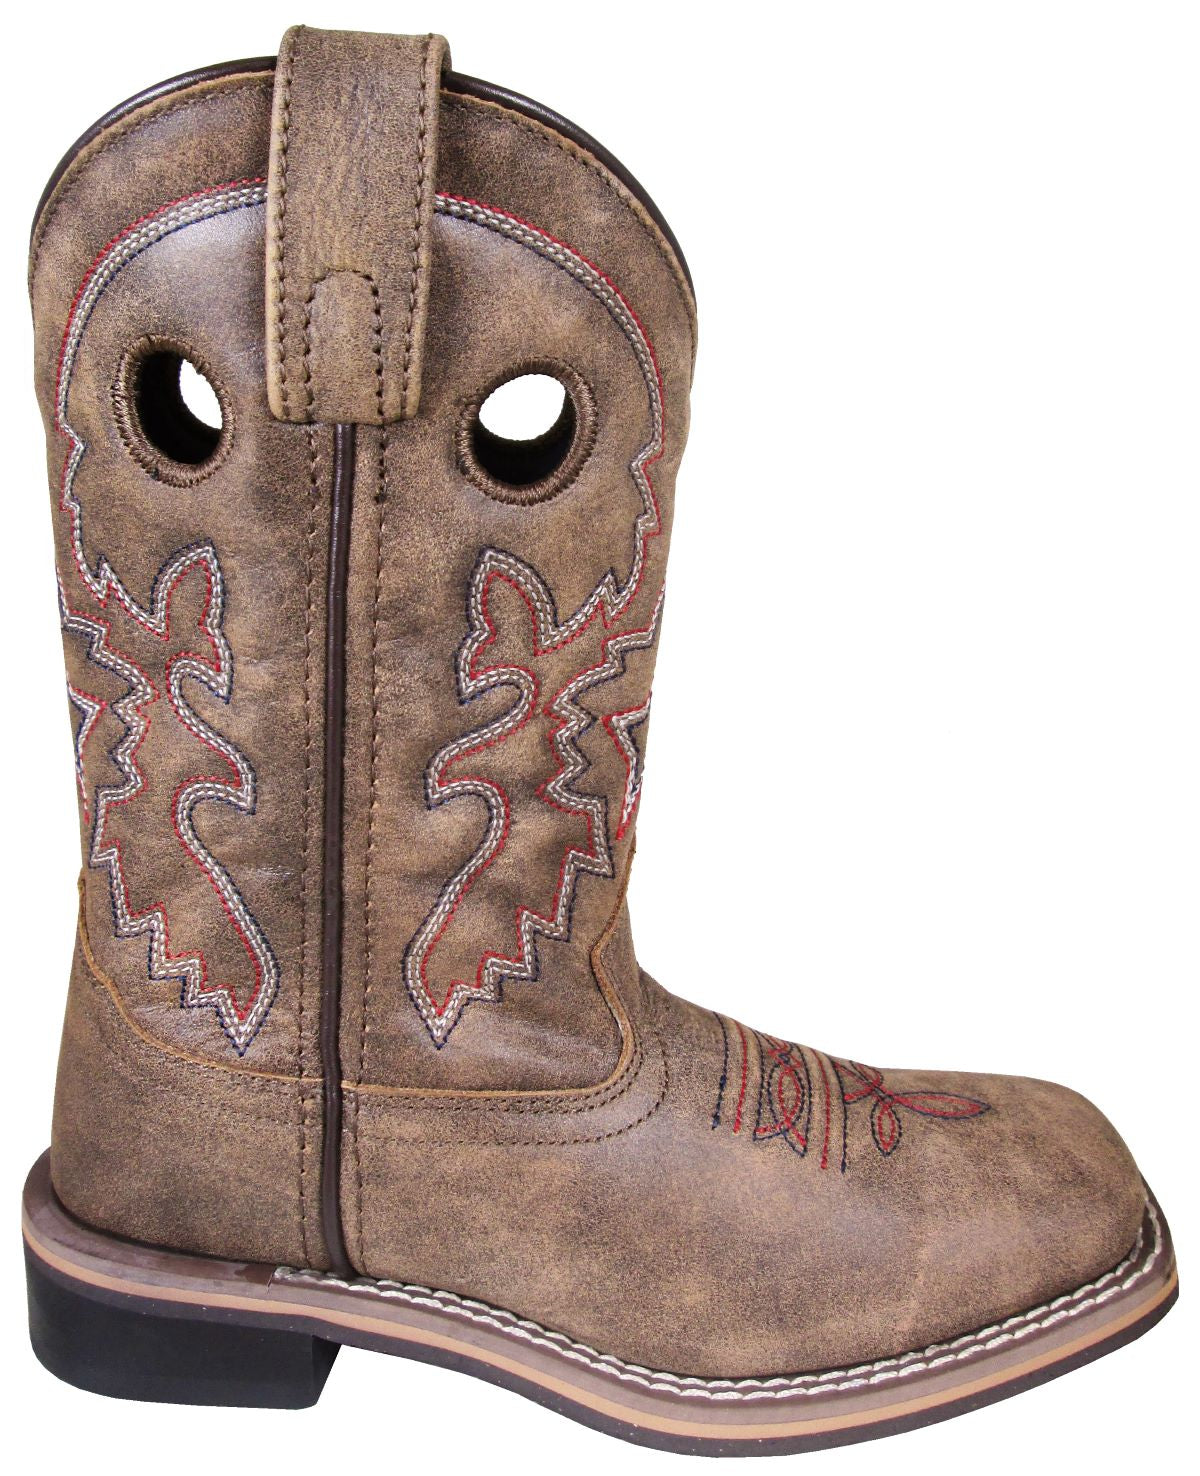 'Smoky Mountain' Youth Canyon Western Square Toe - Vintage Brown